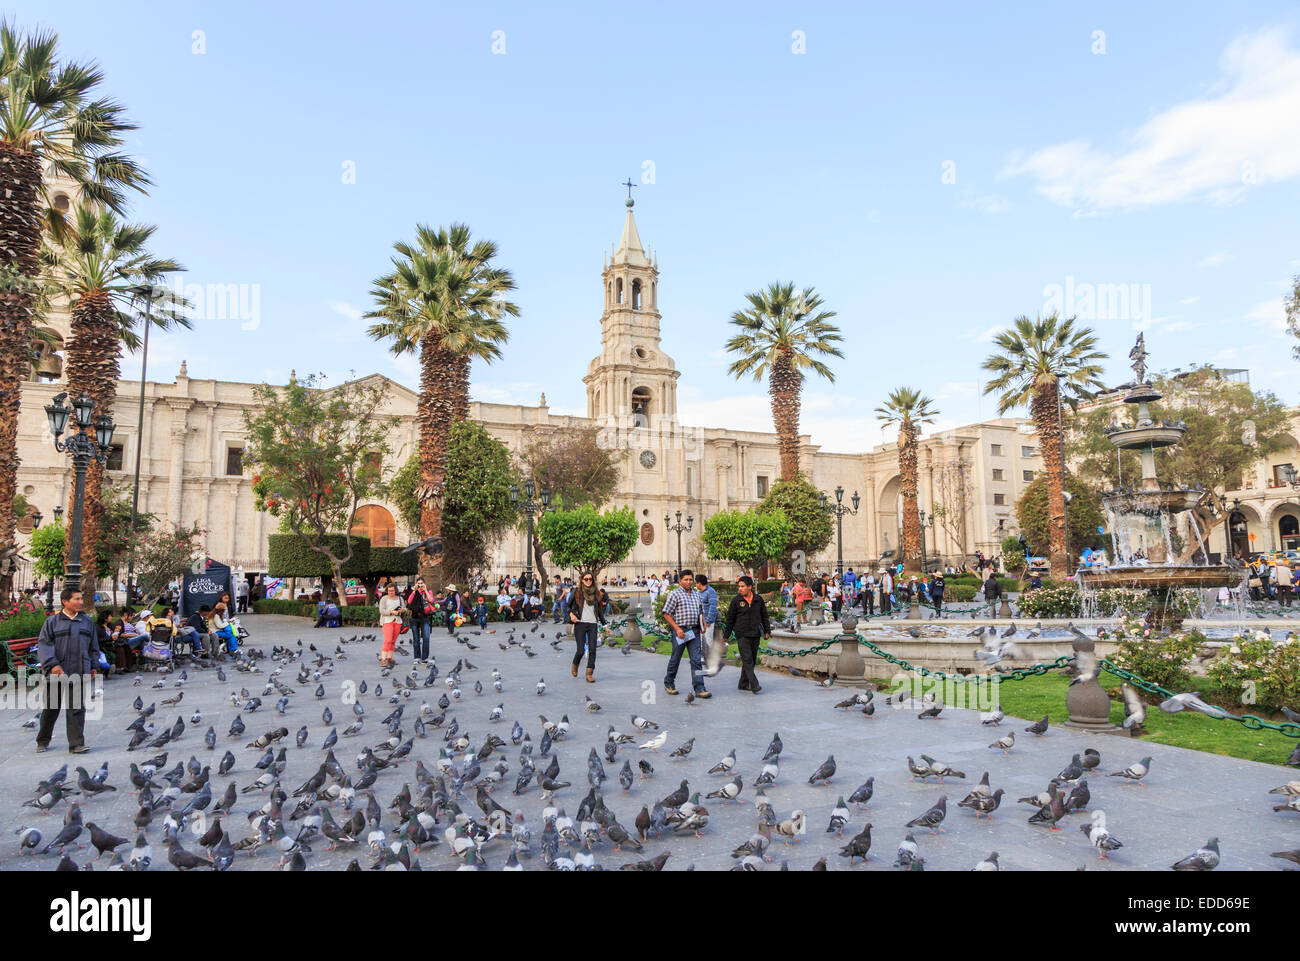 Pigeons in the iconic Plaza de Armas, central Arequipa, Peru with the landmark Basilica Cathedral of Arequipa in the background, on a sunny day Stock Photo